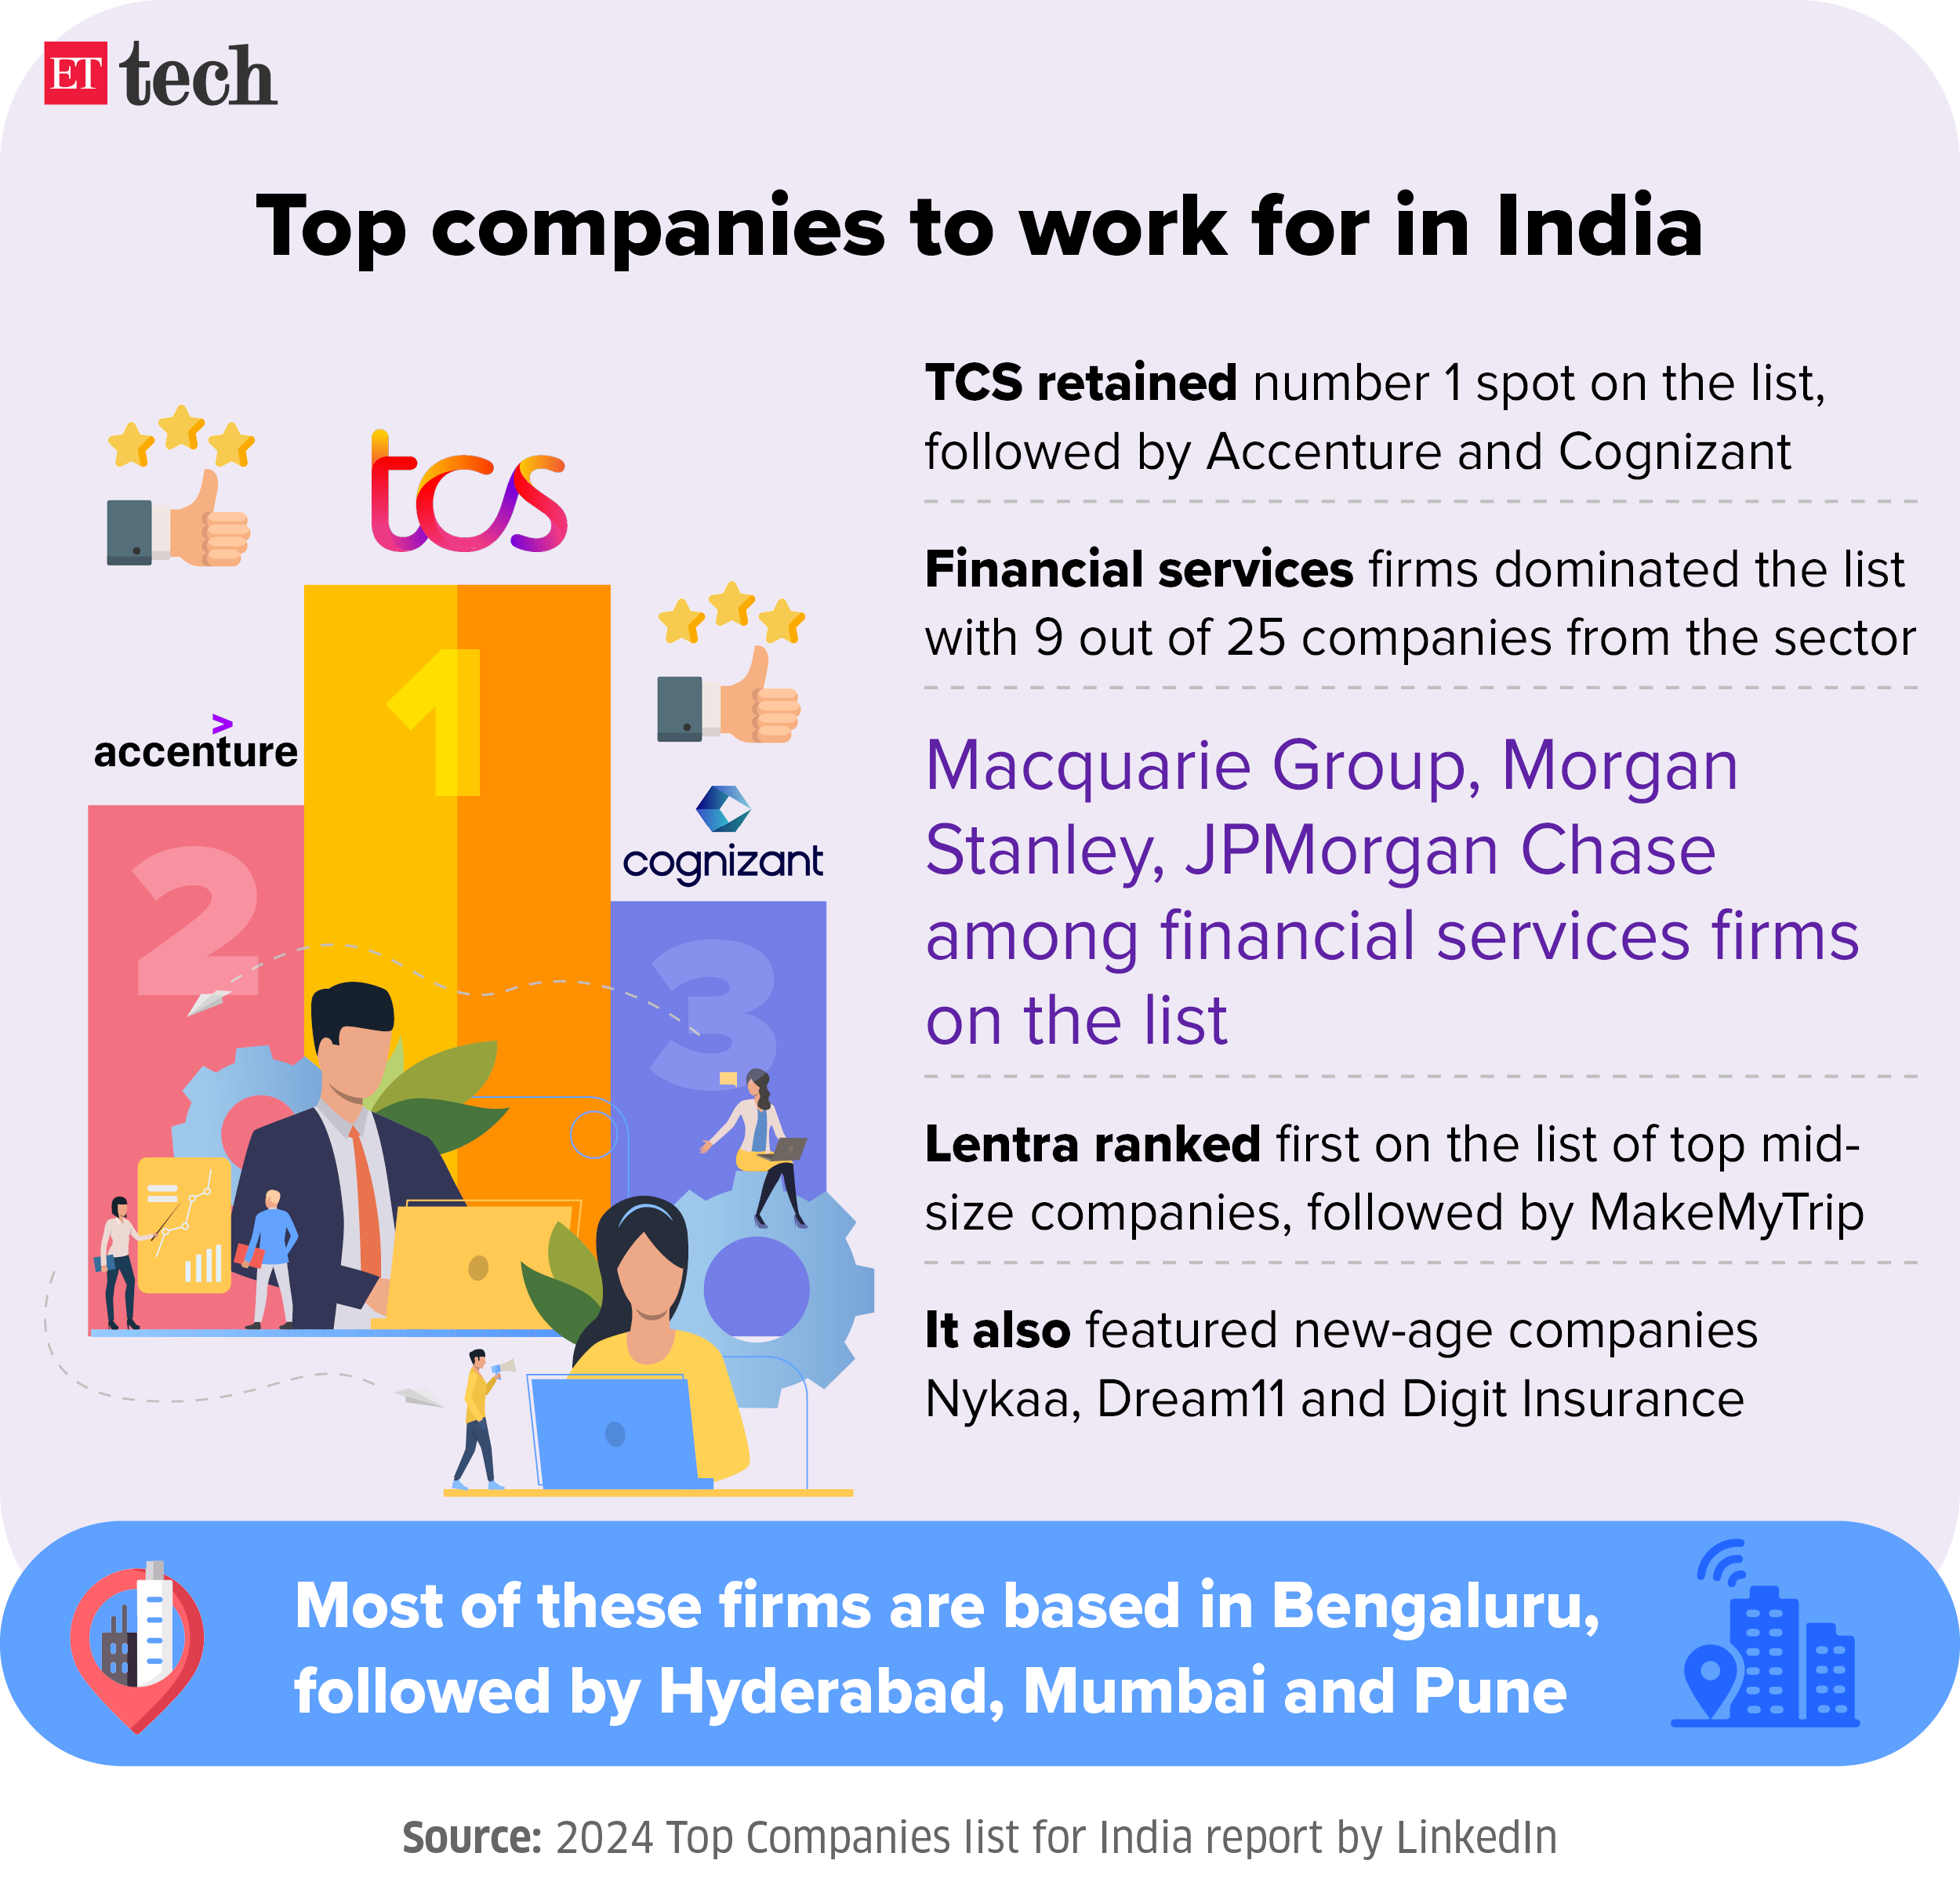 Top companies to work for in India